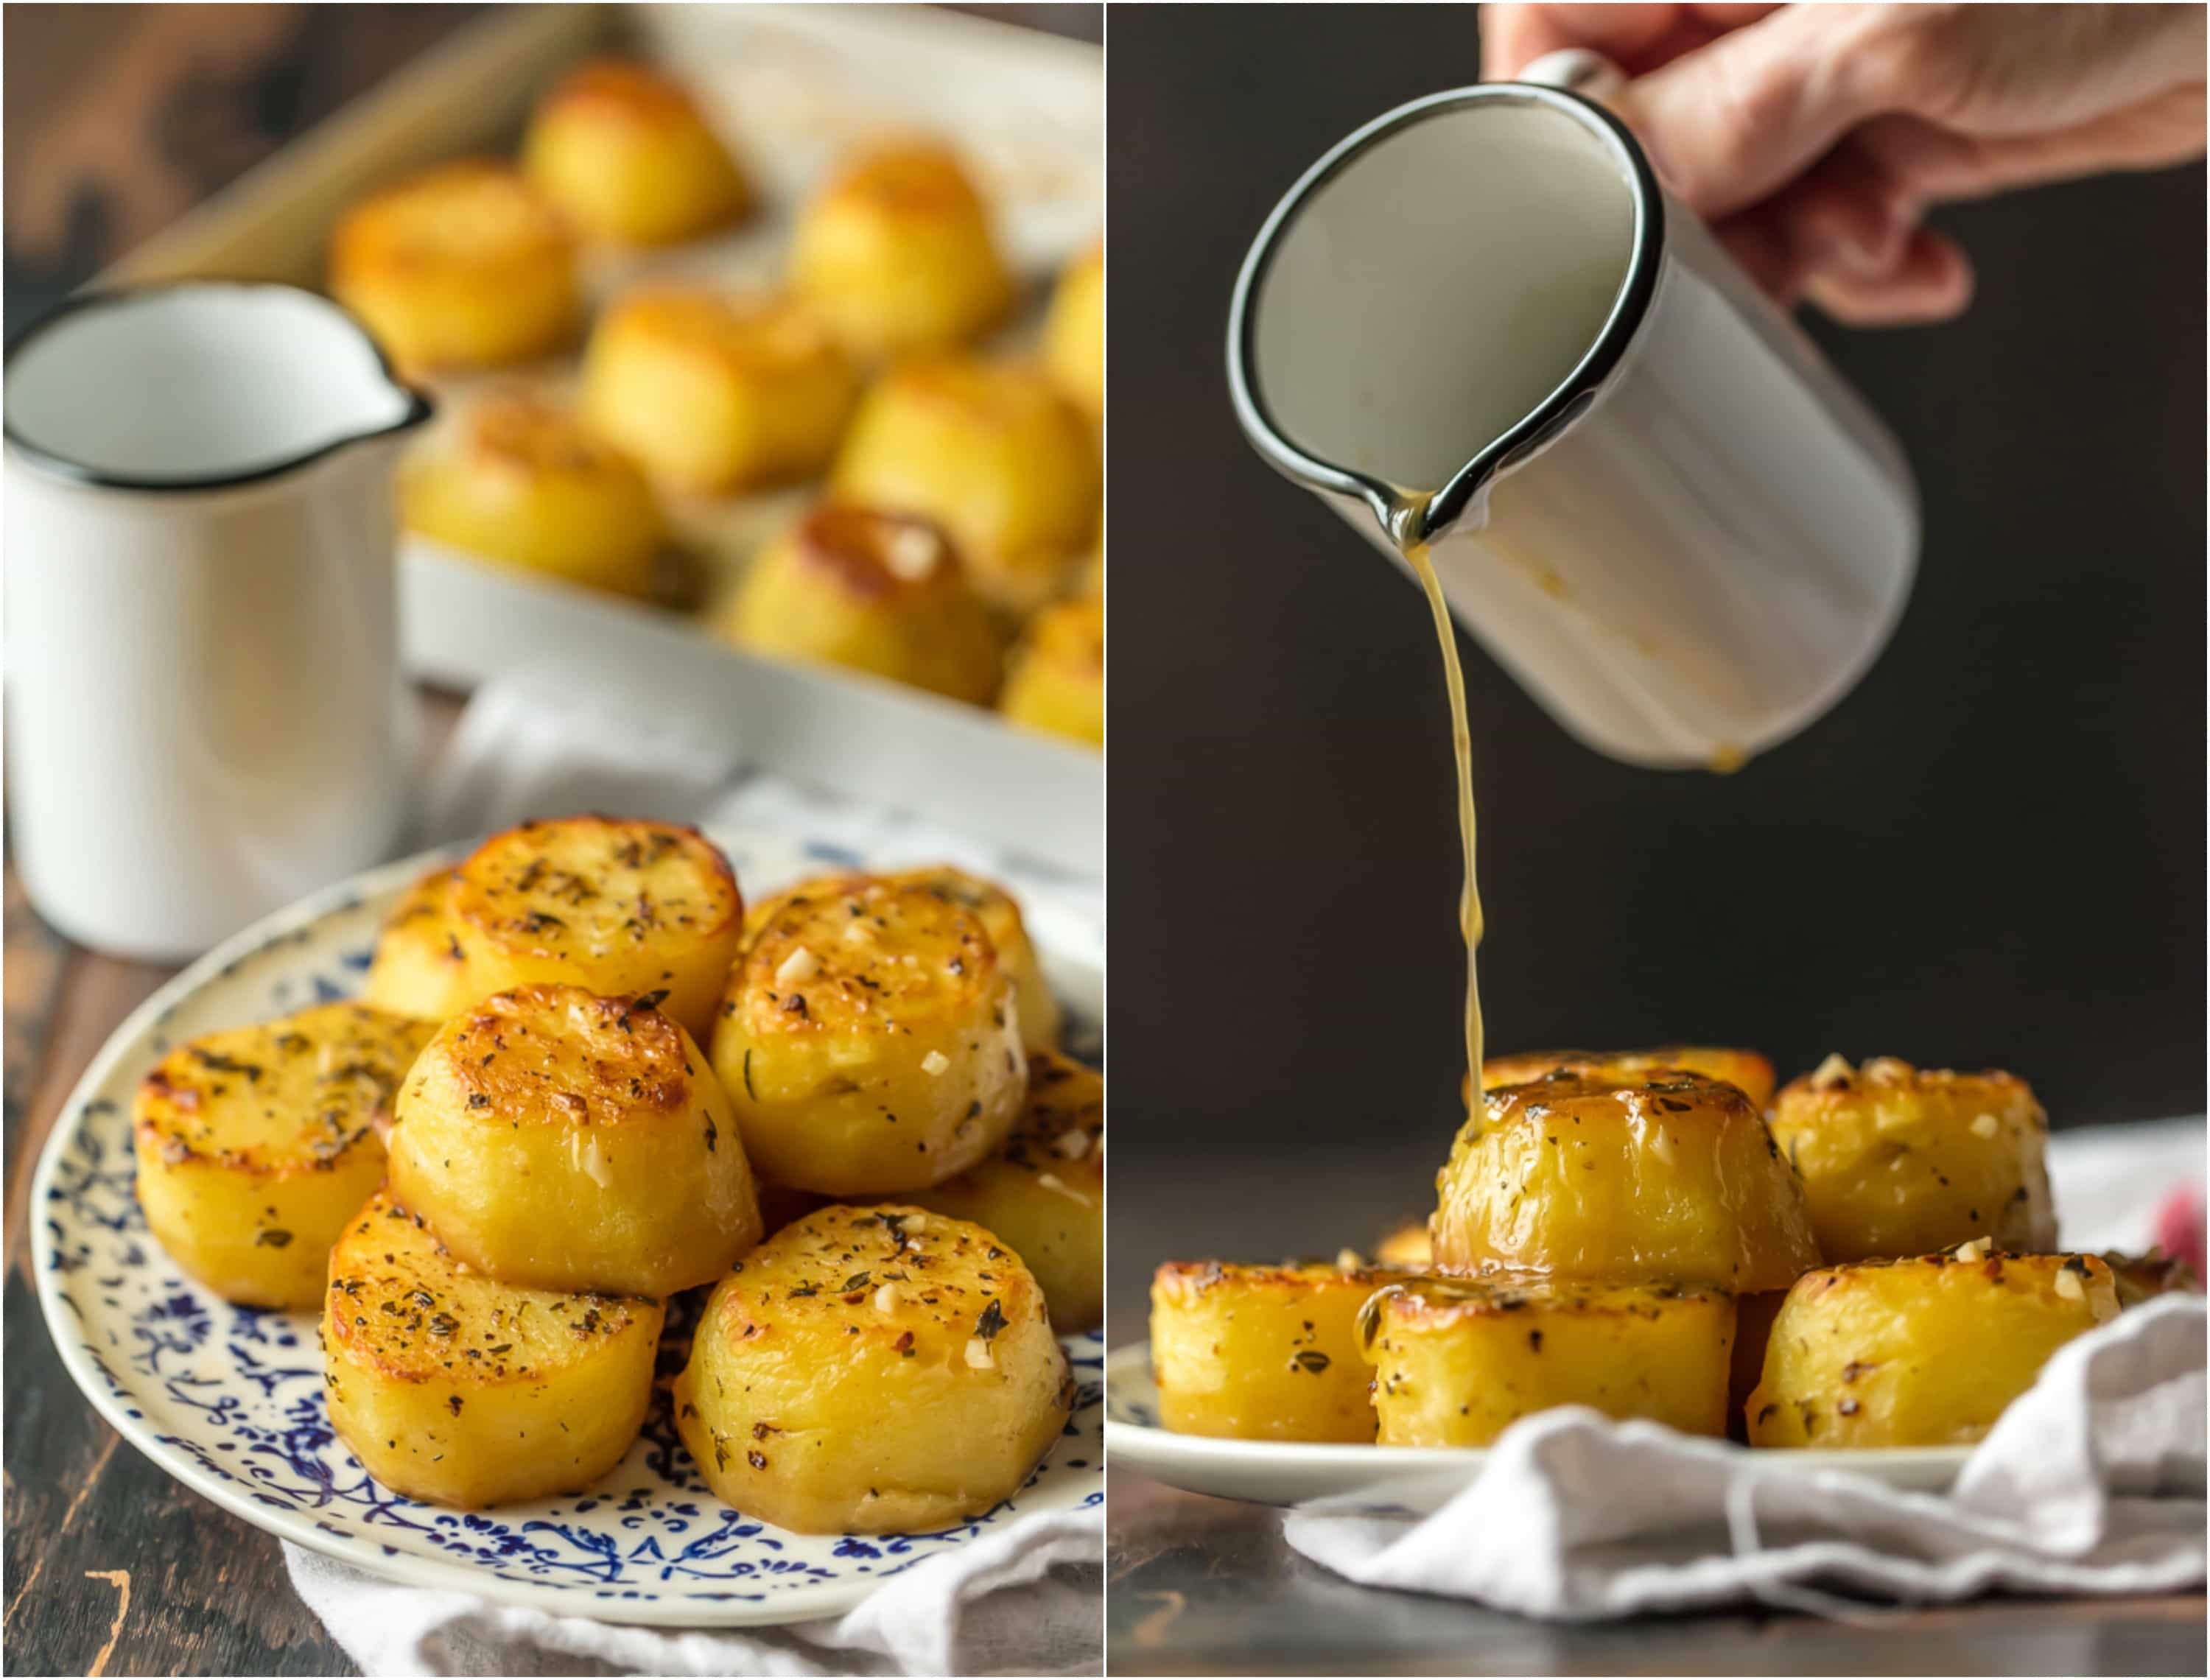 Left: Melting Potatoes on plate. Right: Butter being poured over melting potatoes